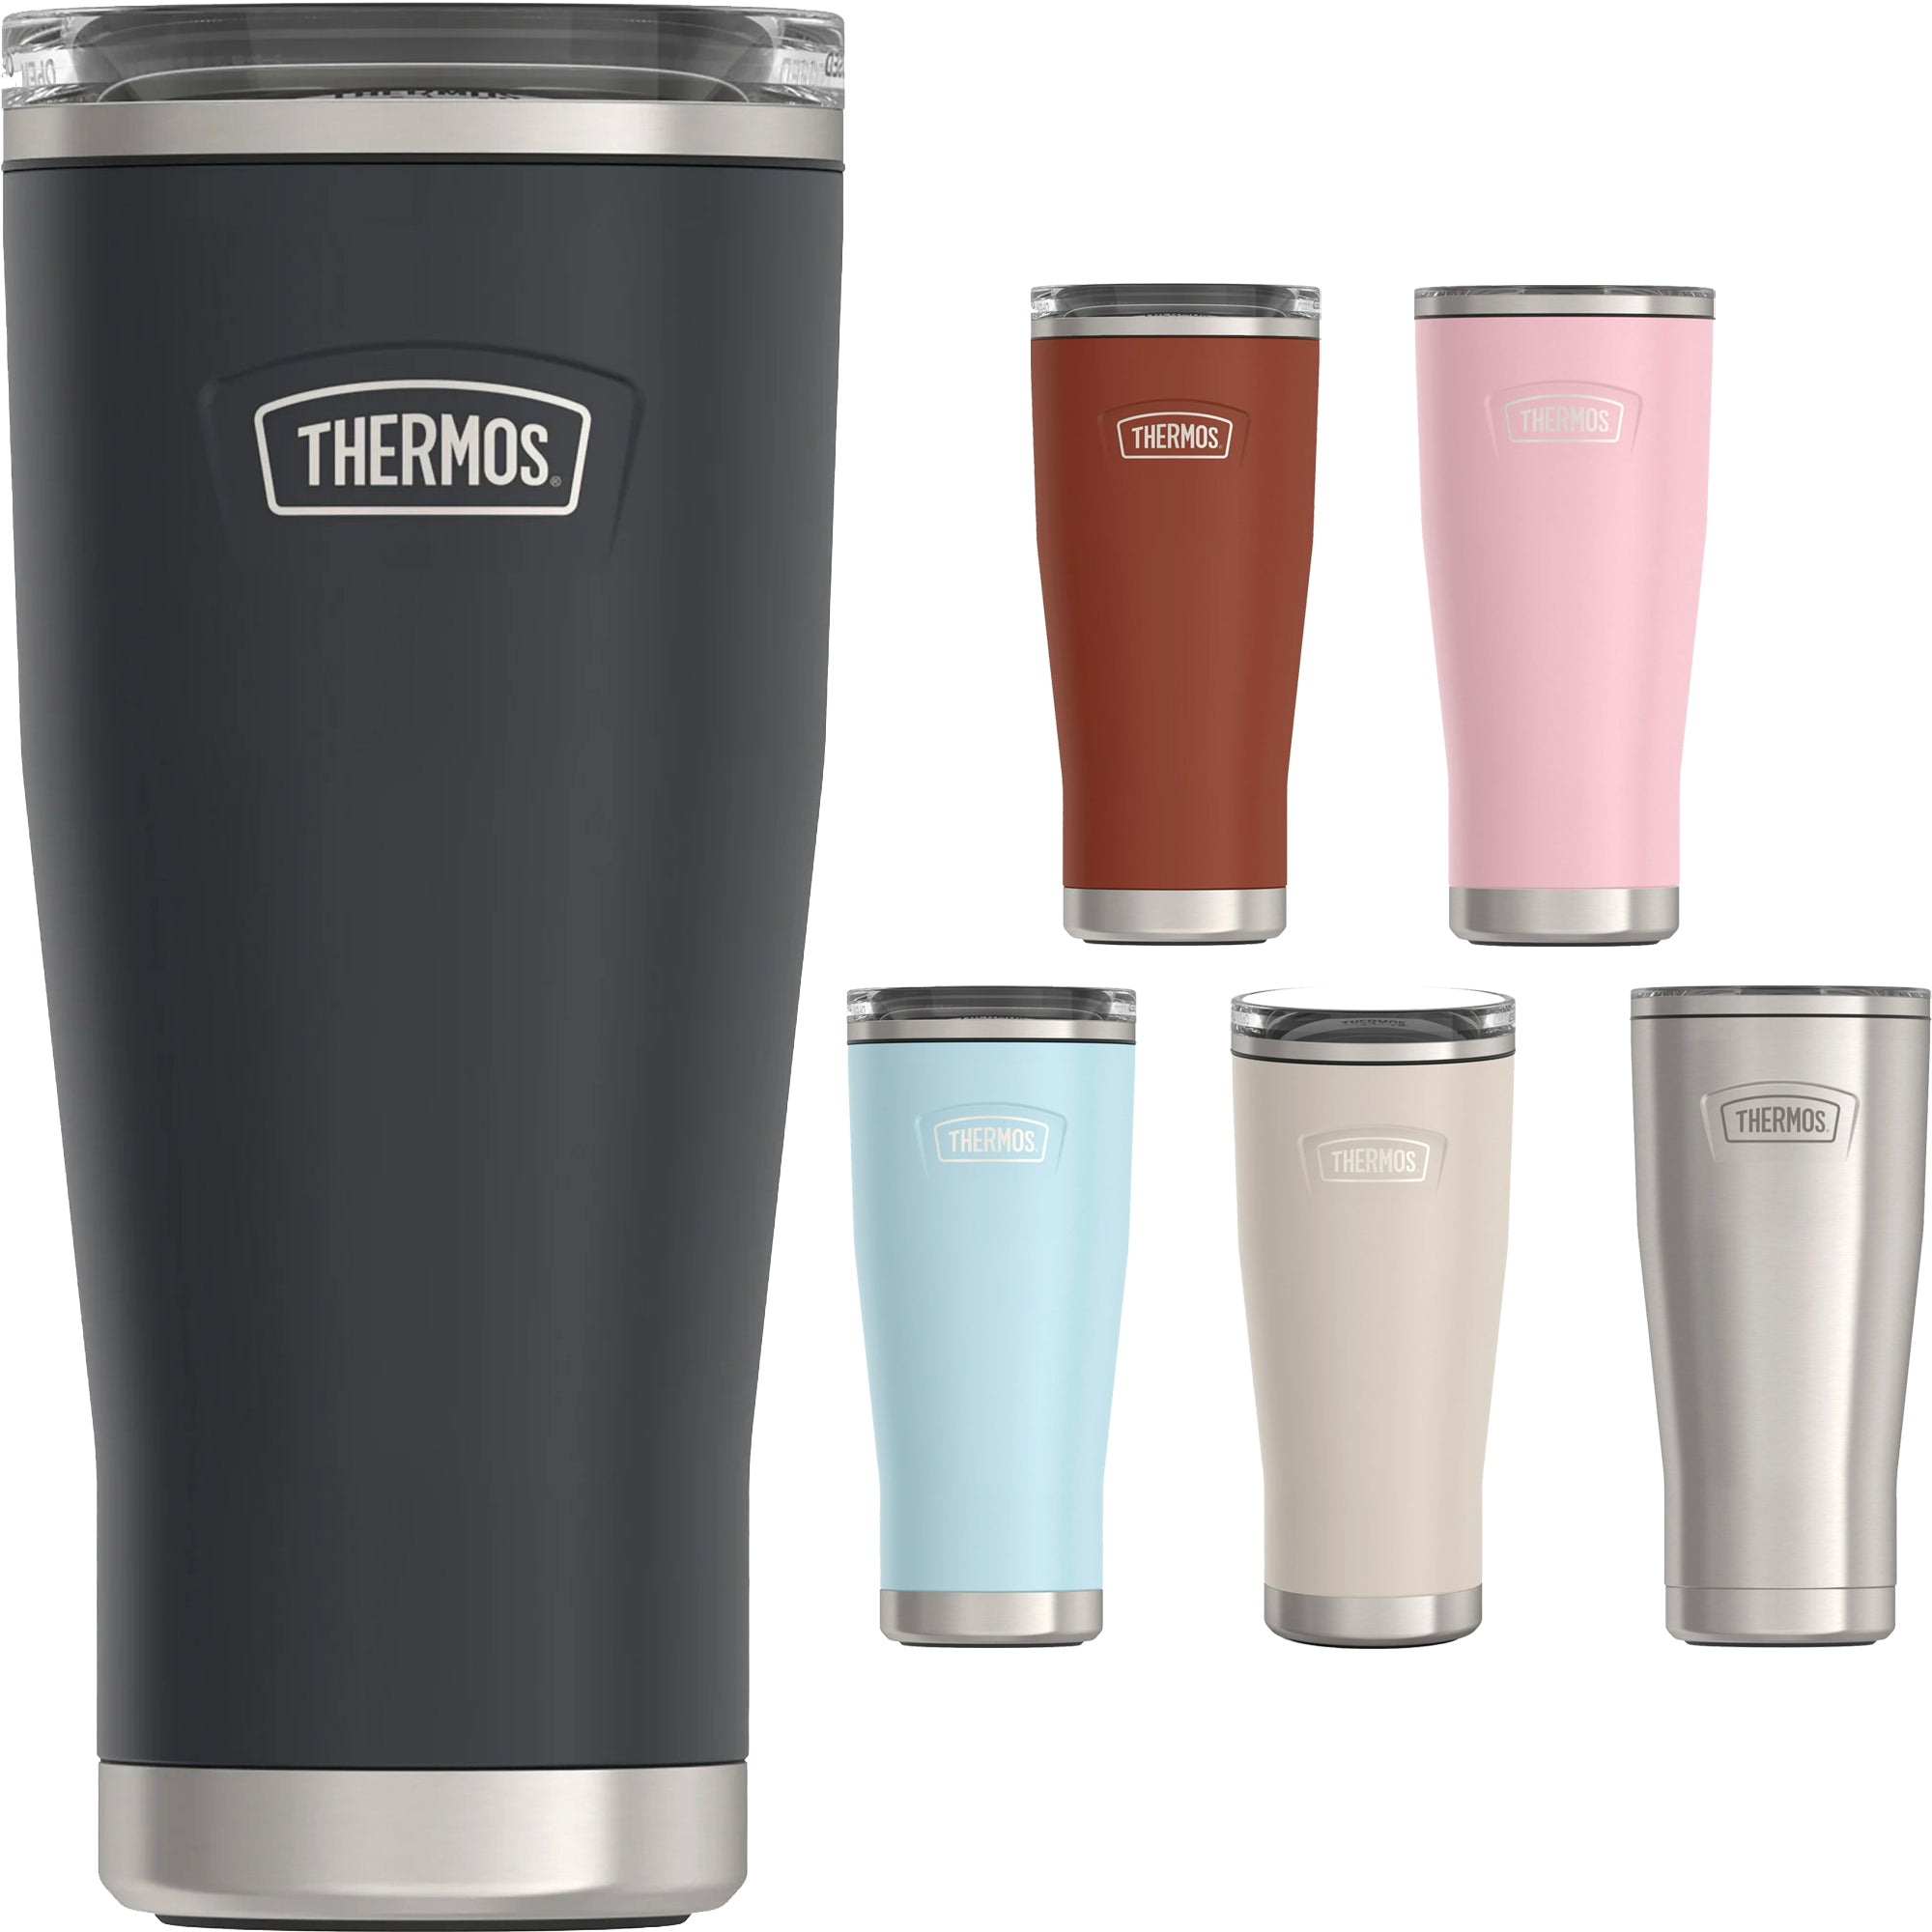 Thermos ICON Series Stainless Steel Vacuum Insulated Tumbler, 16oz, Saddle  